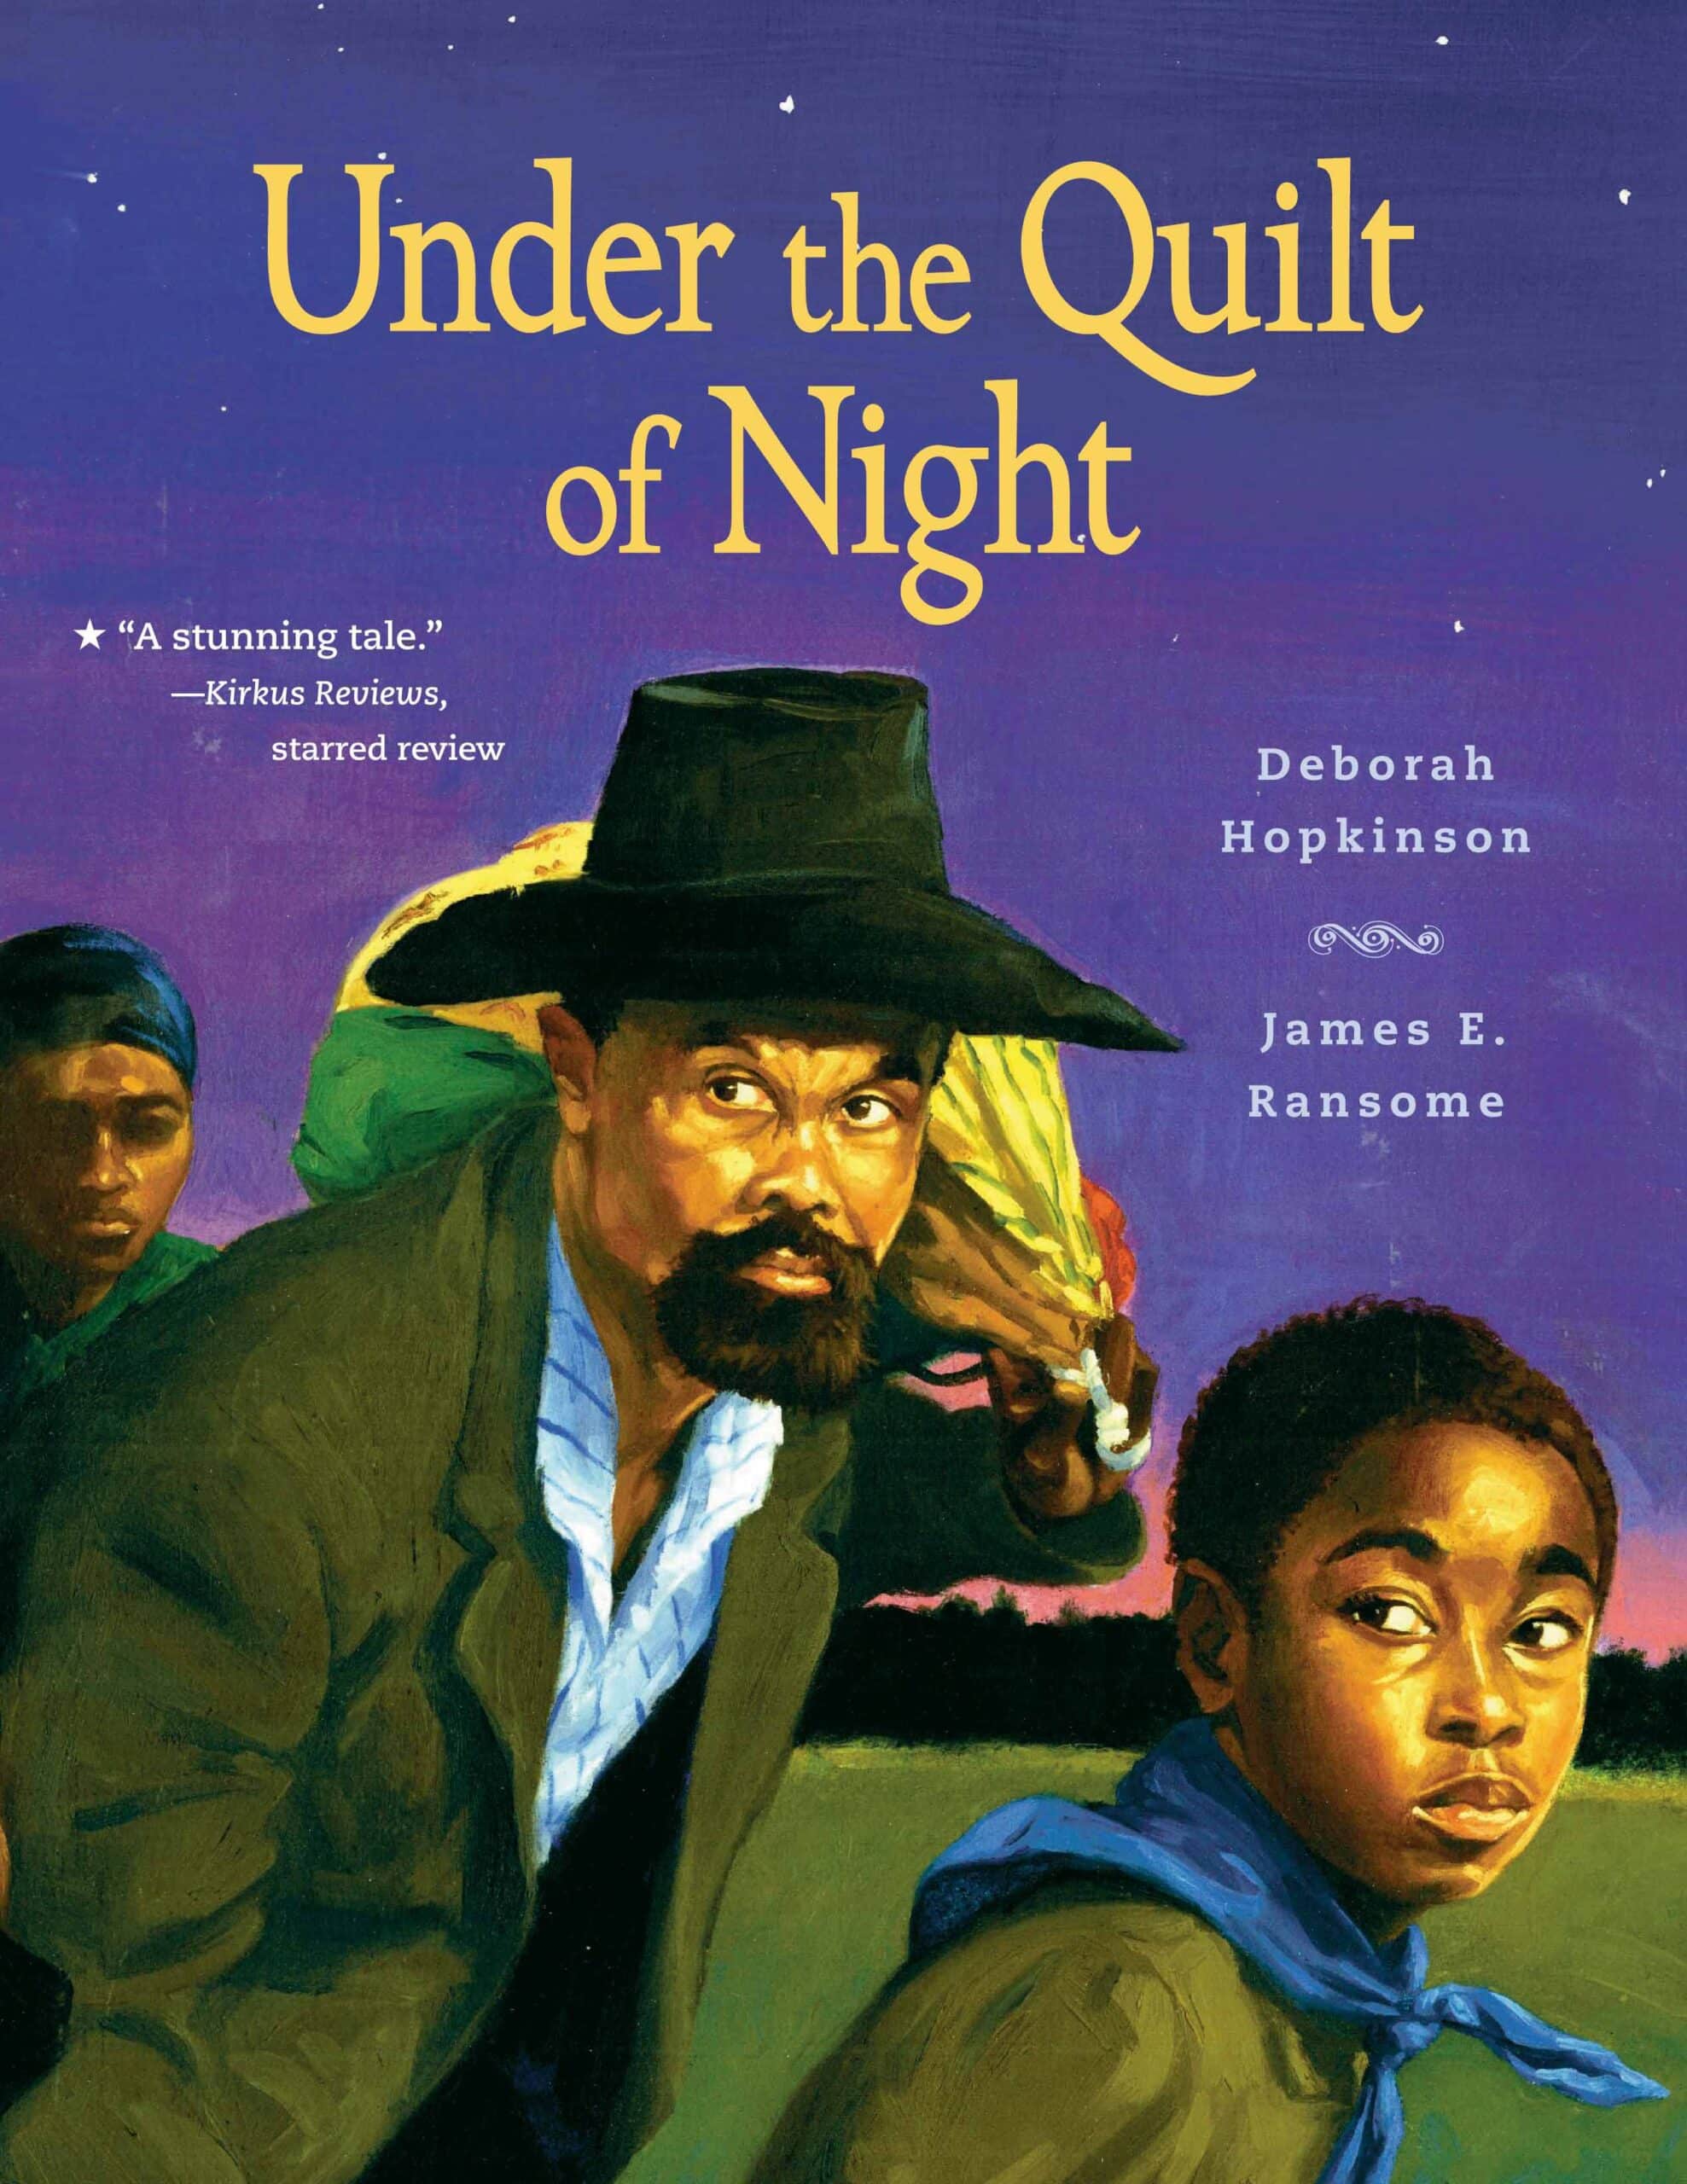 The cover for the book Under the Quilt of Night